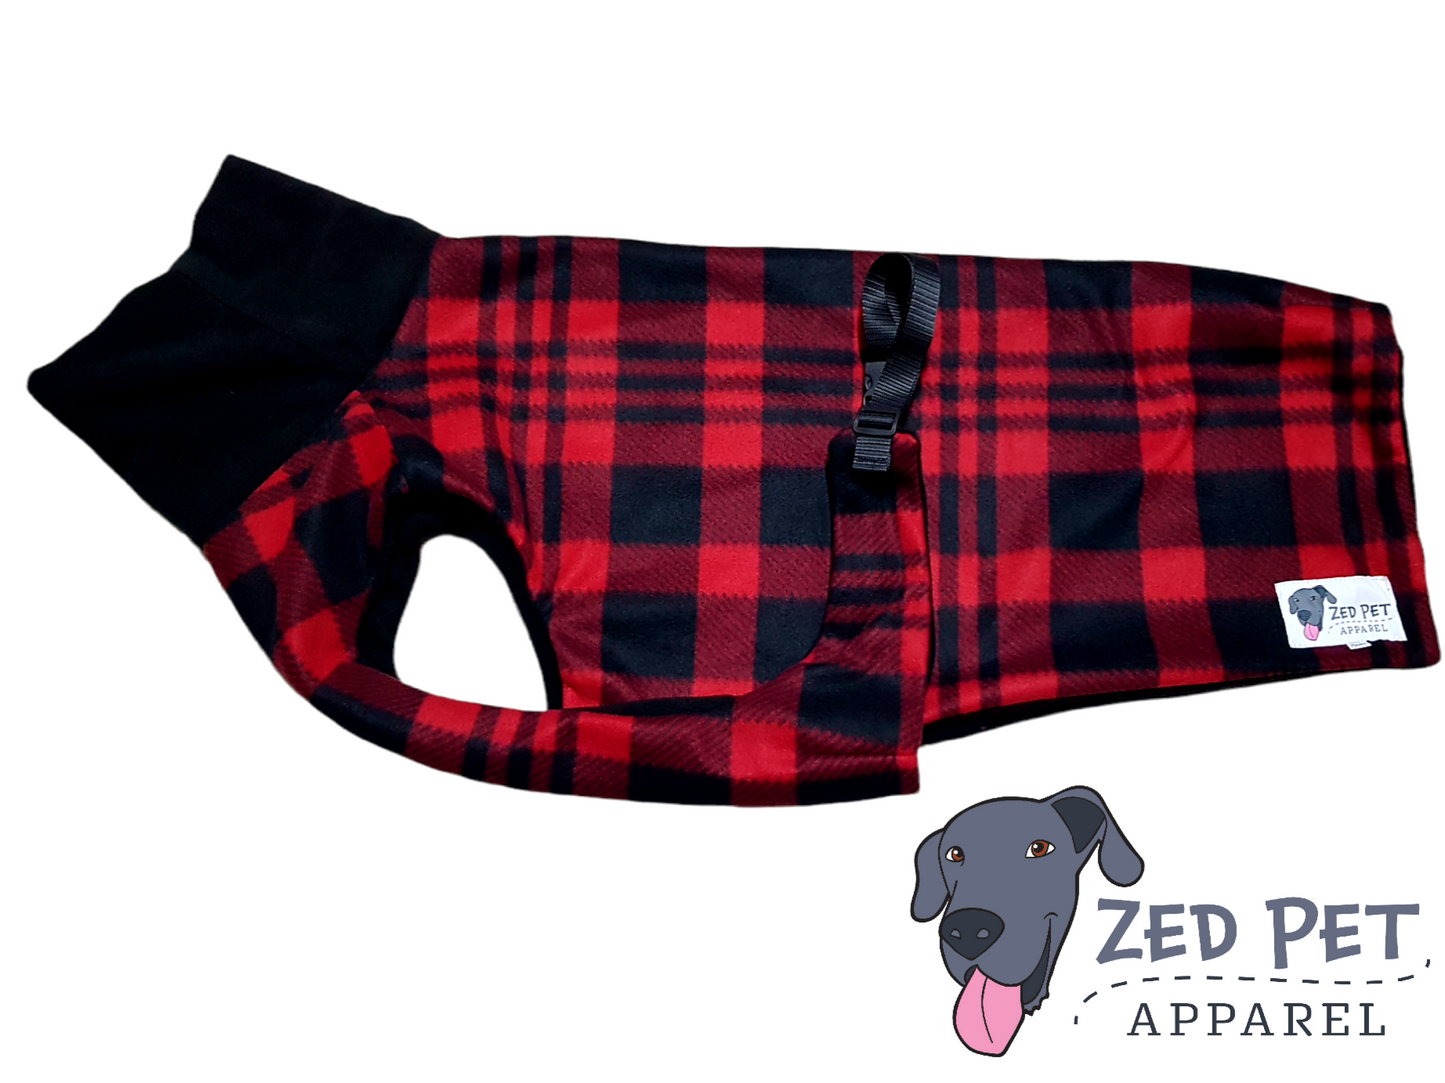 Red and black plaid fleece dog coat with a black turtleneck